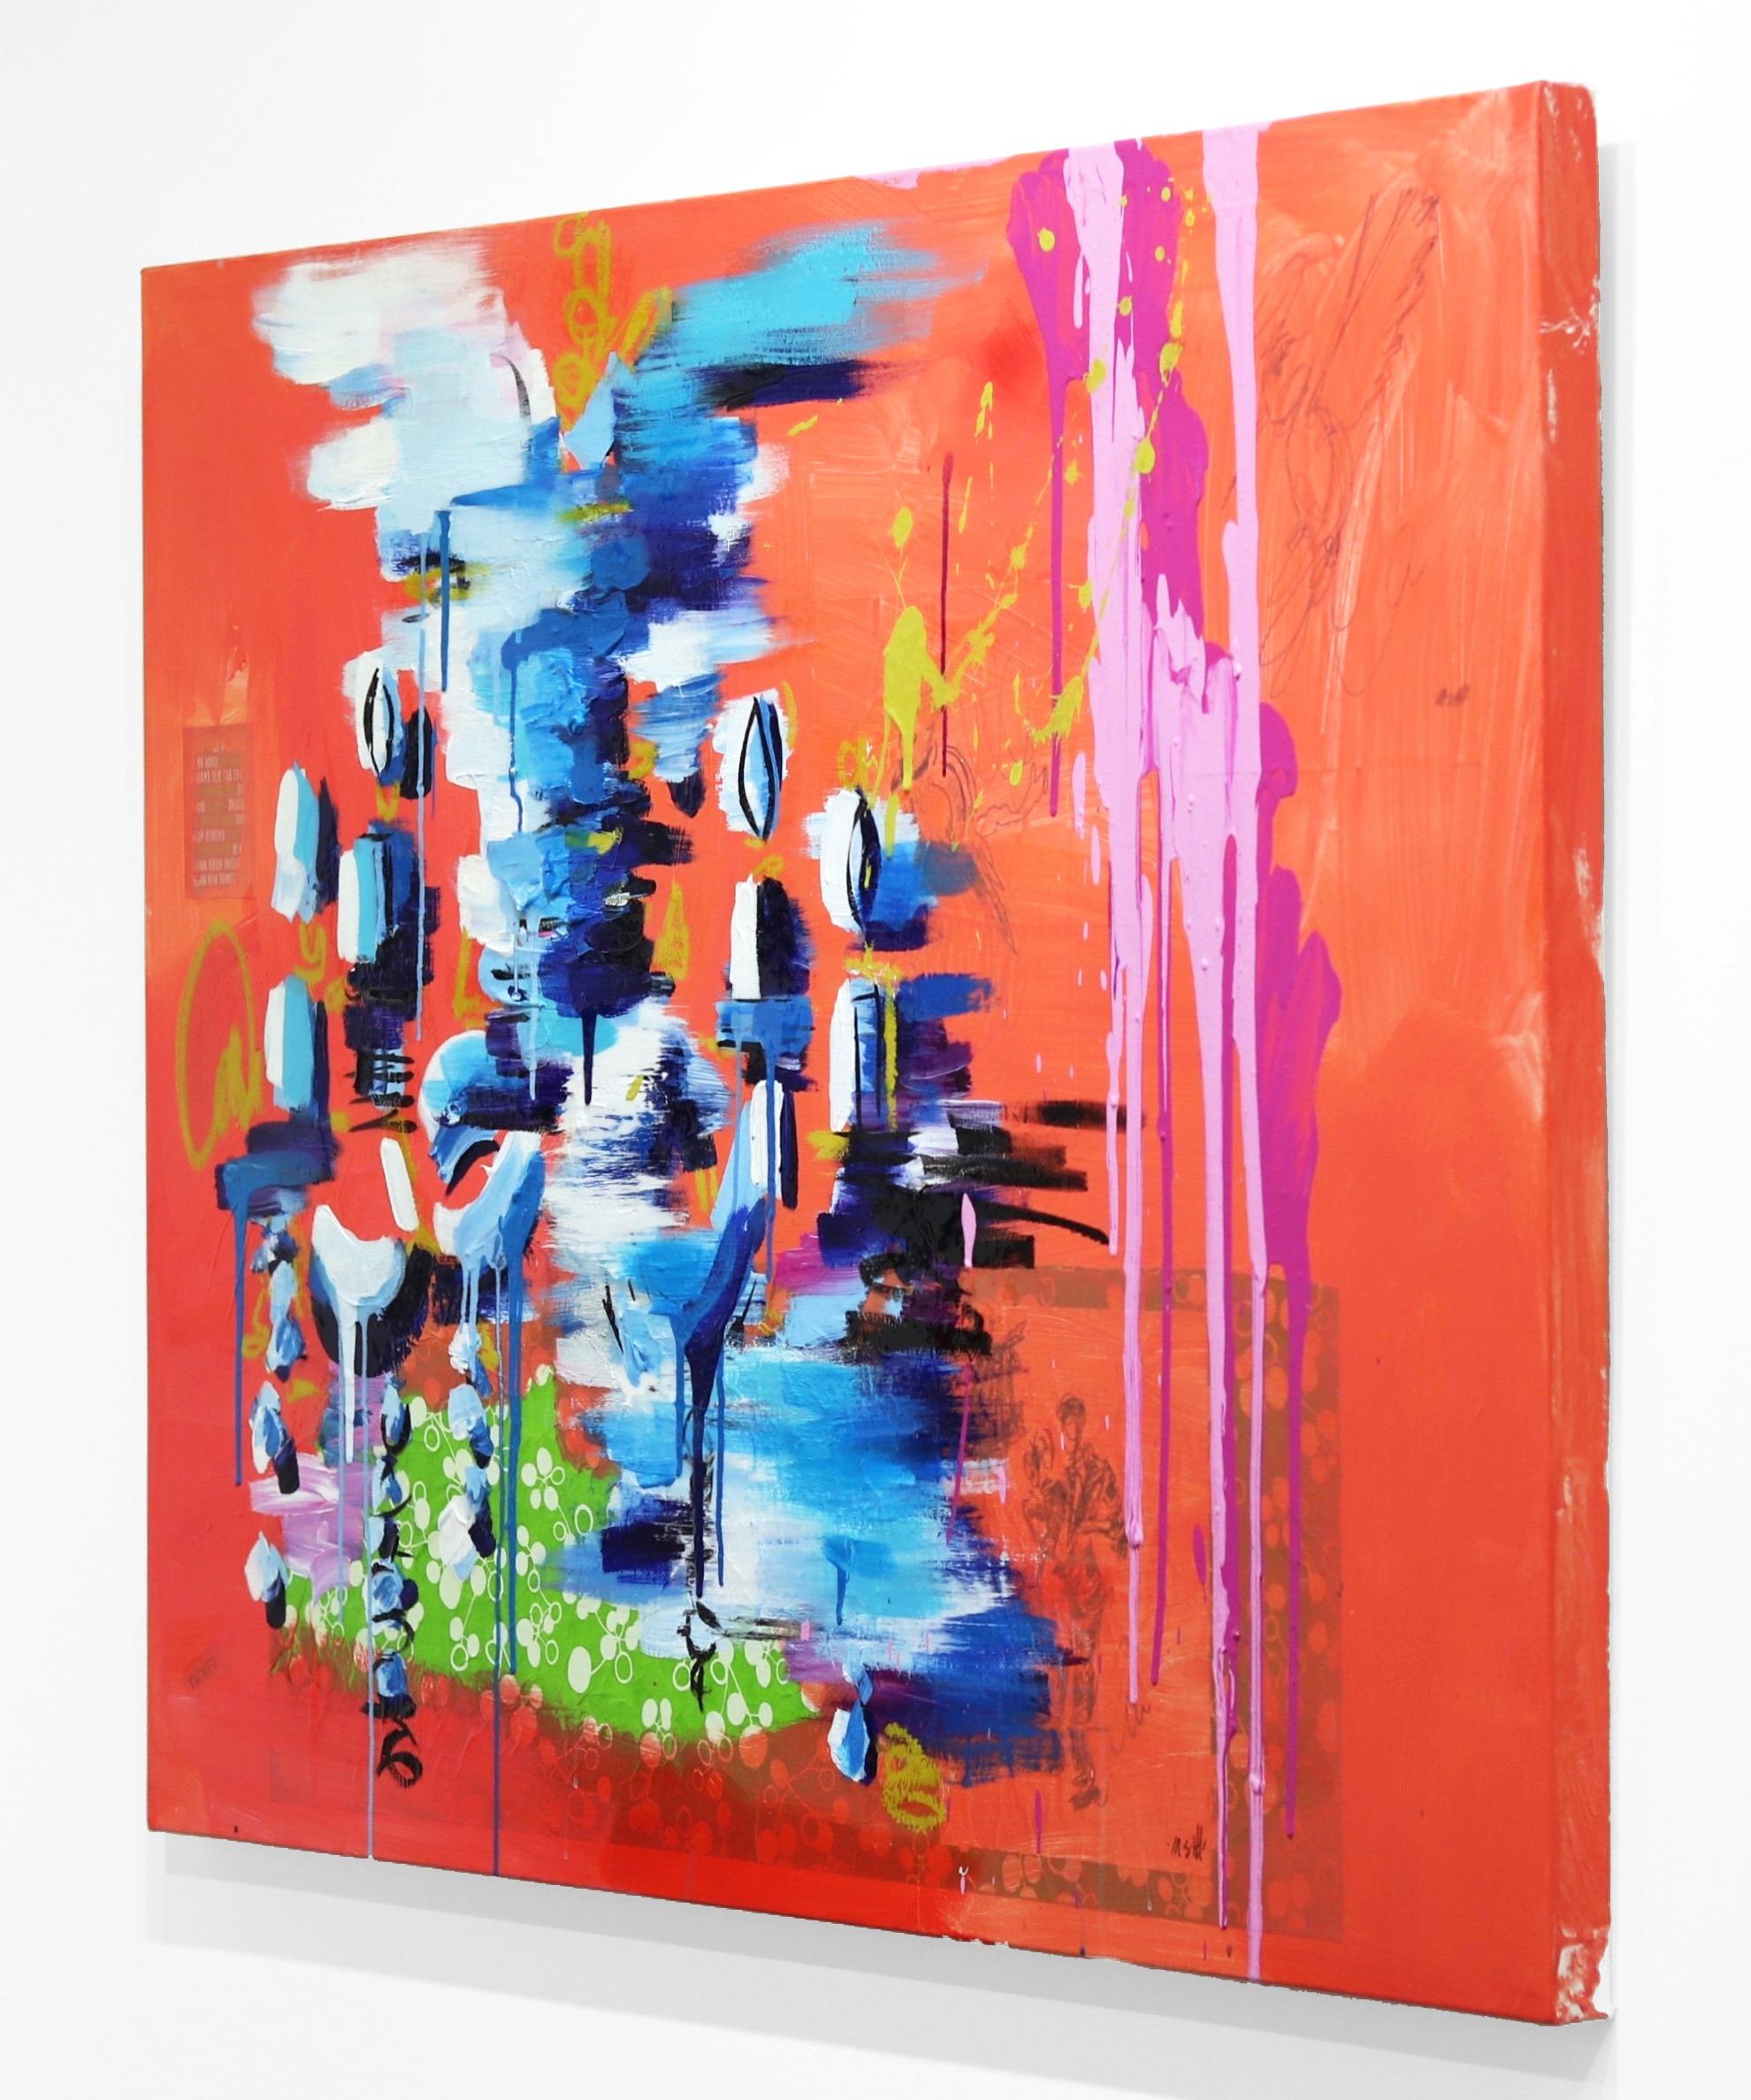 Texan artist Ash Almonte's vibrant original paintings are inspired by abstract expressionism combined with an optimistic contemporary outlook. Almonte is inspired by beautiful color, incredible music, outrageous fashion, and likes to take risks